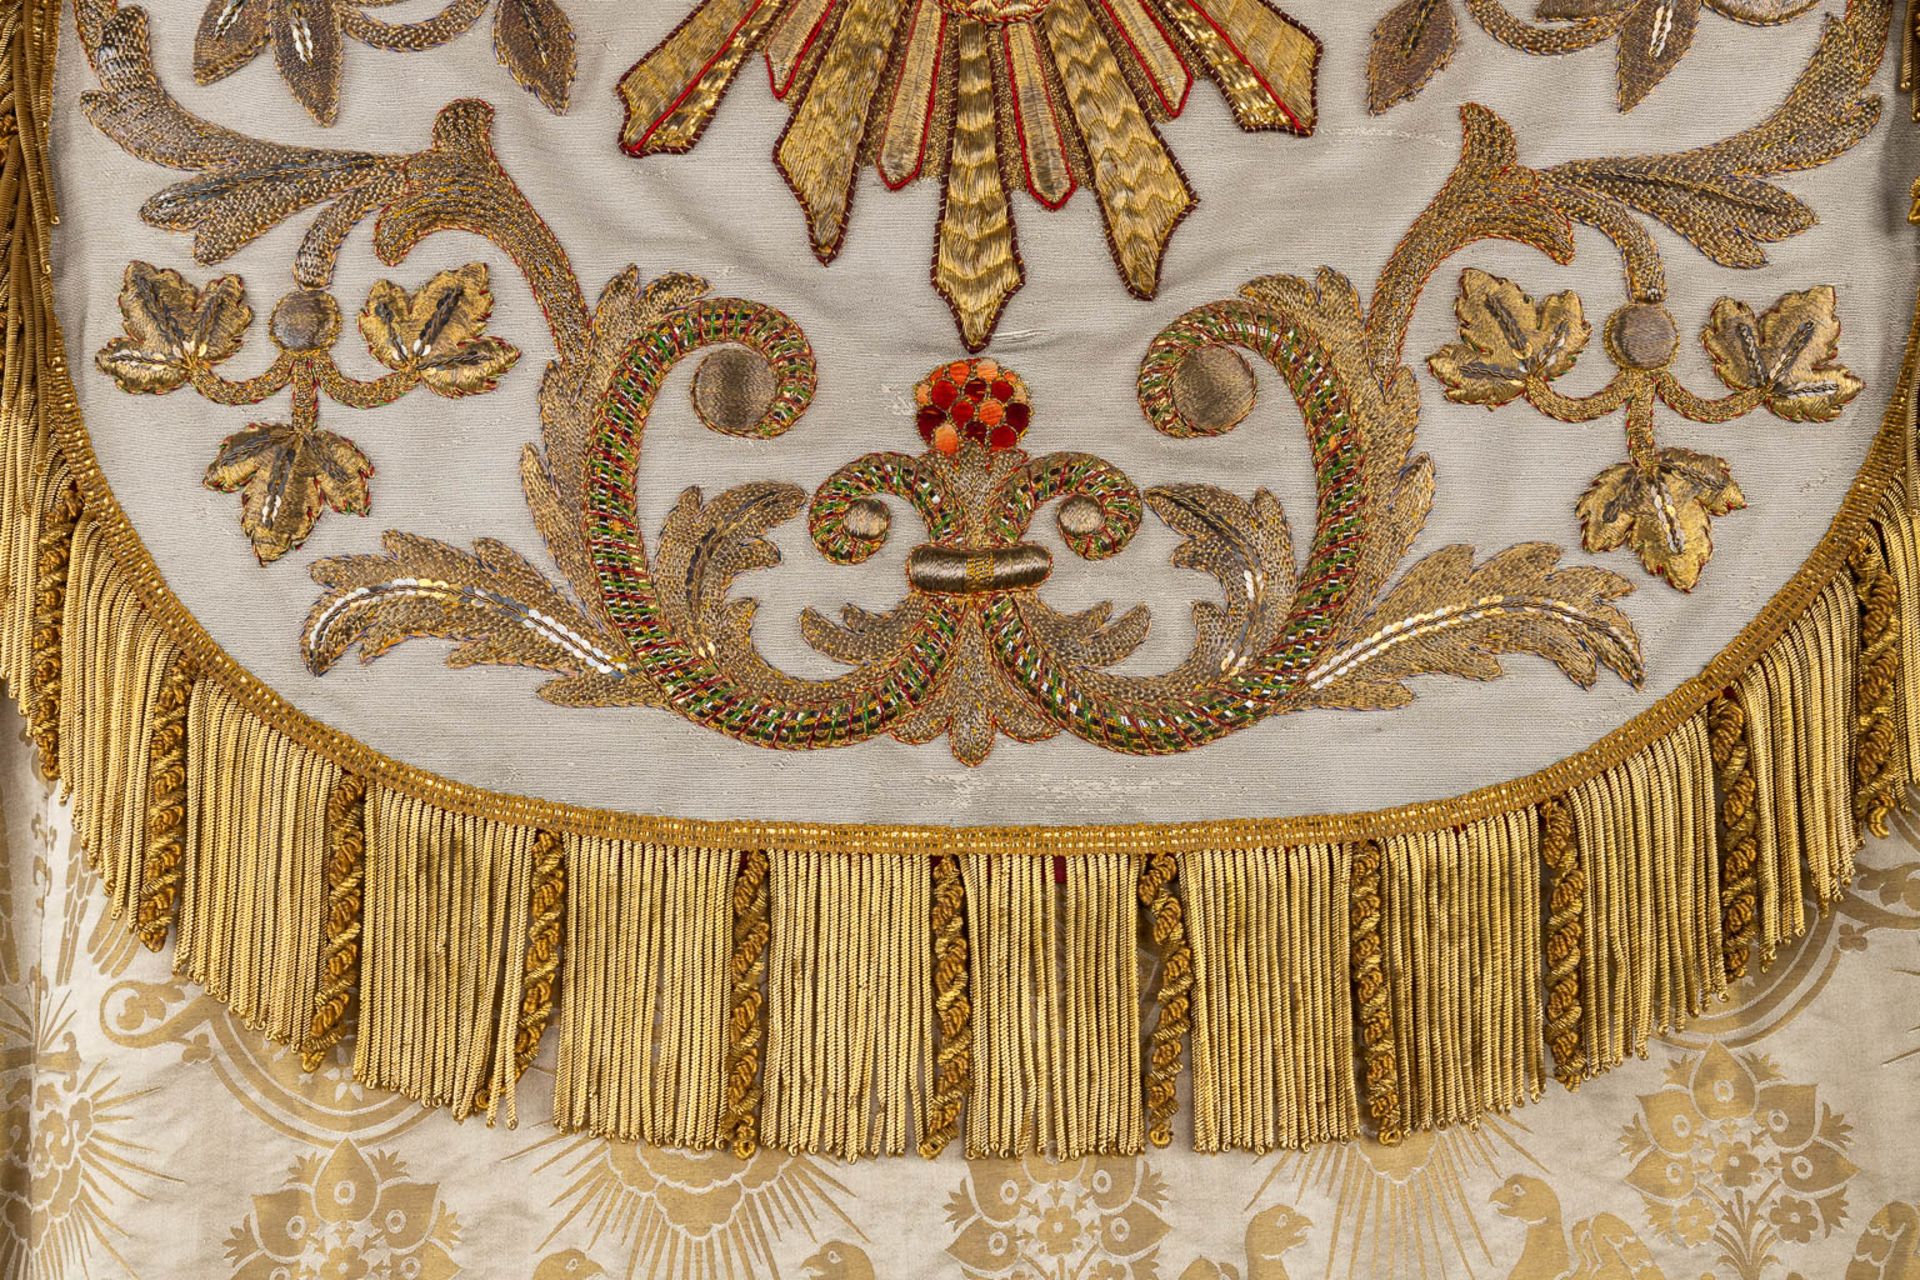 An antique cope, thick gold thread embroideries and decorated fabric. 19th C. (H:154 cm) - Image 4 of 8